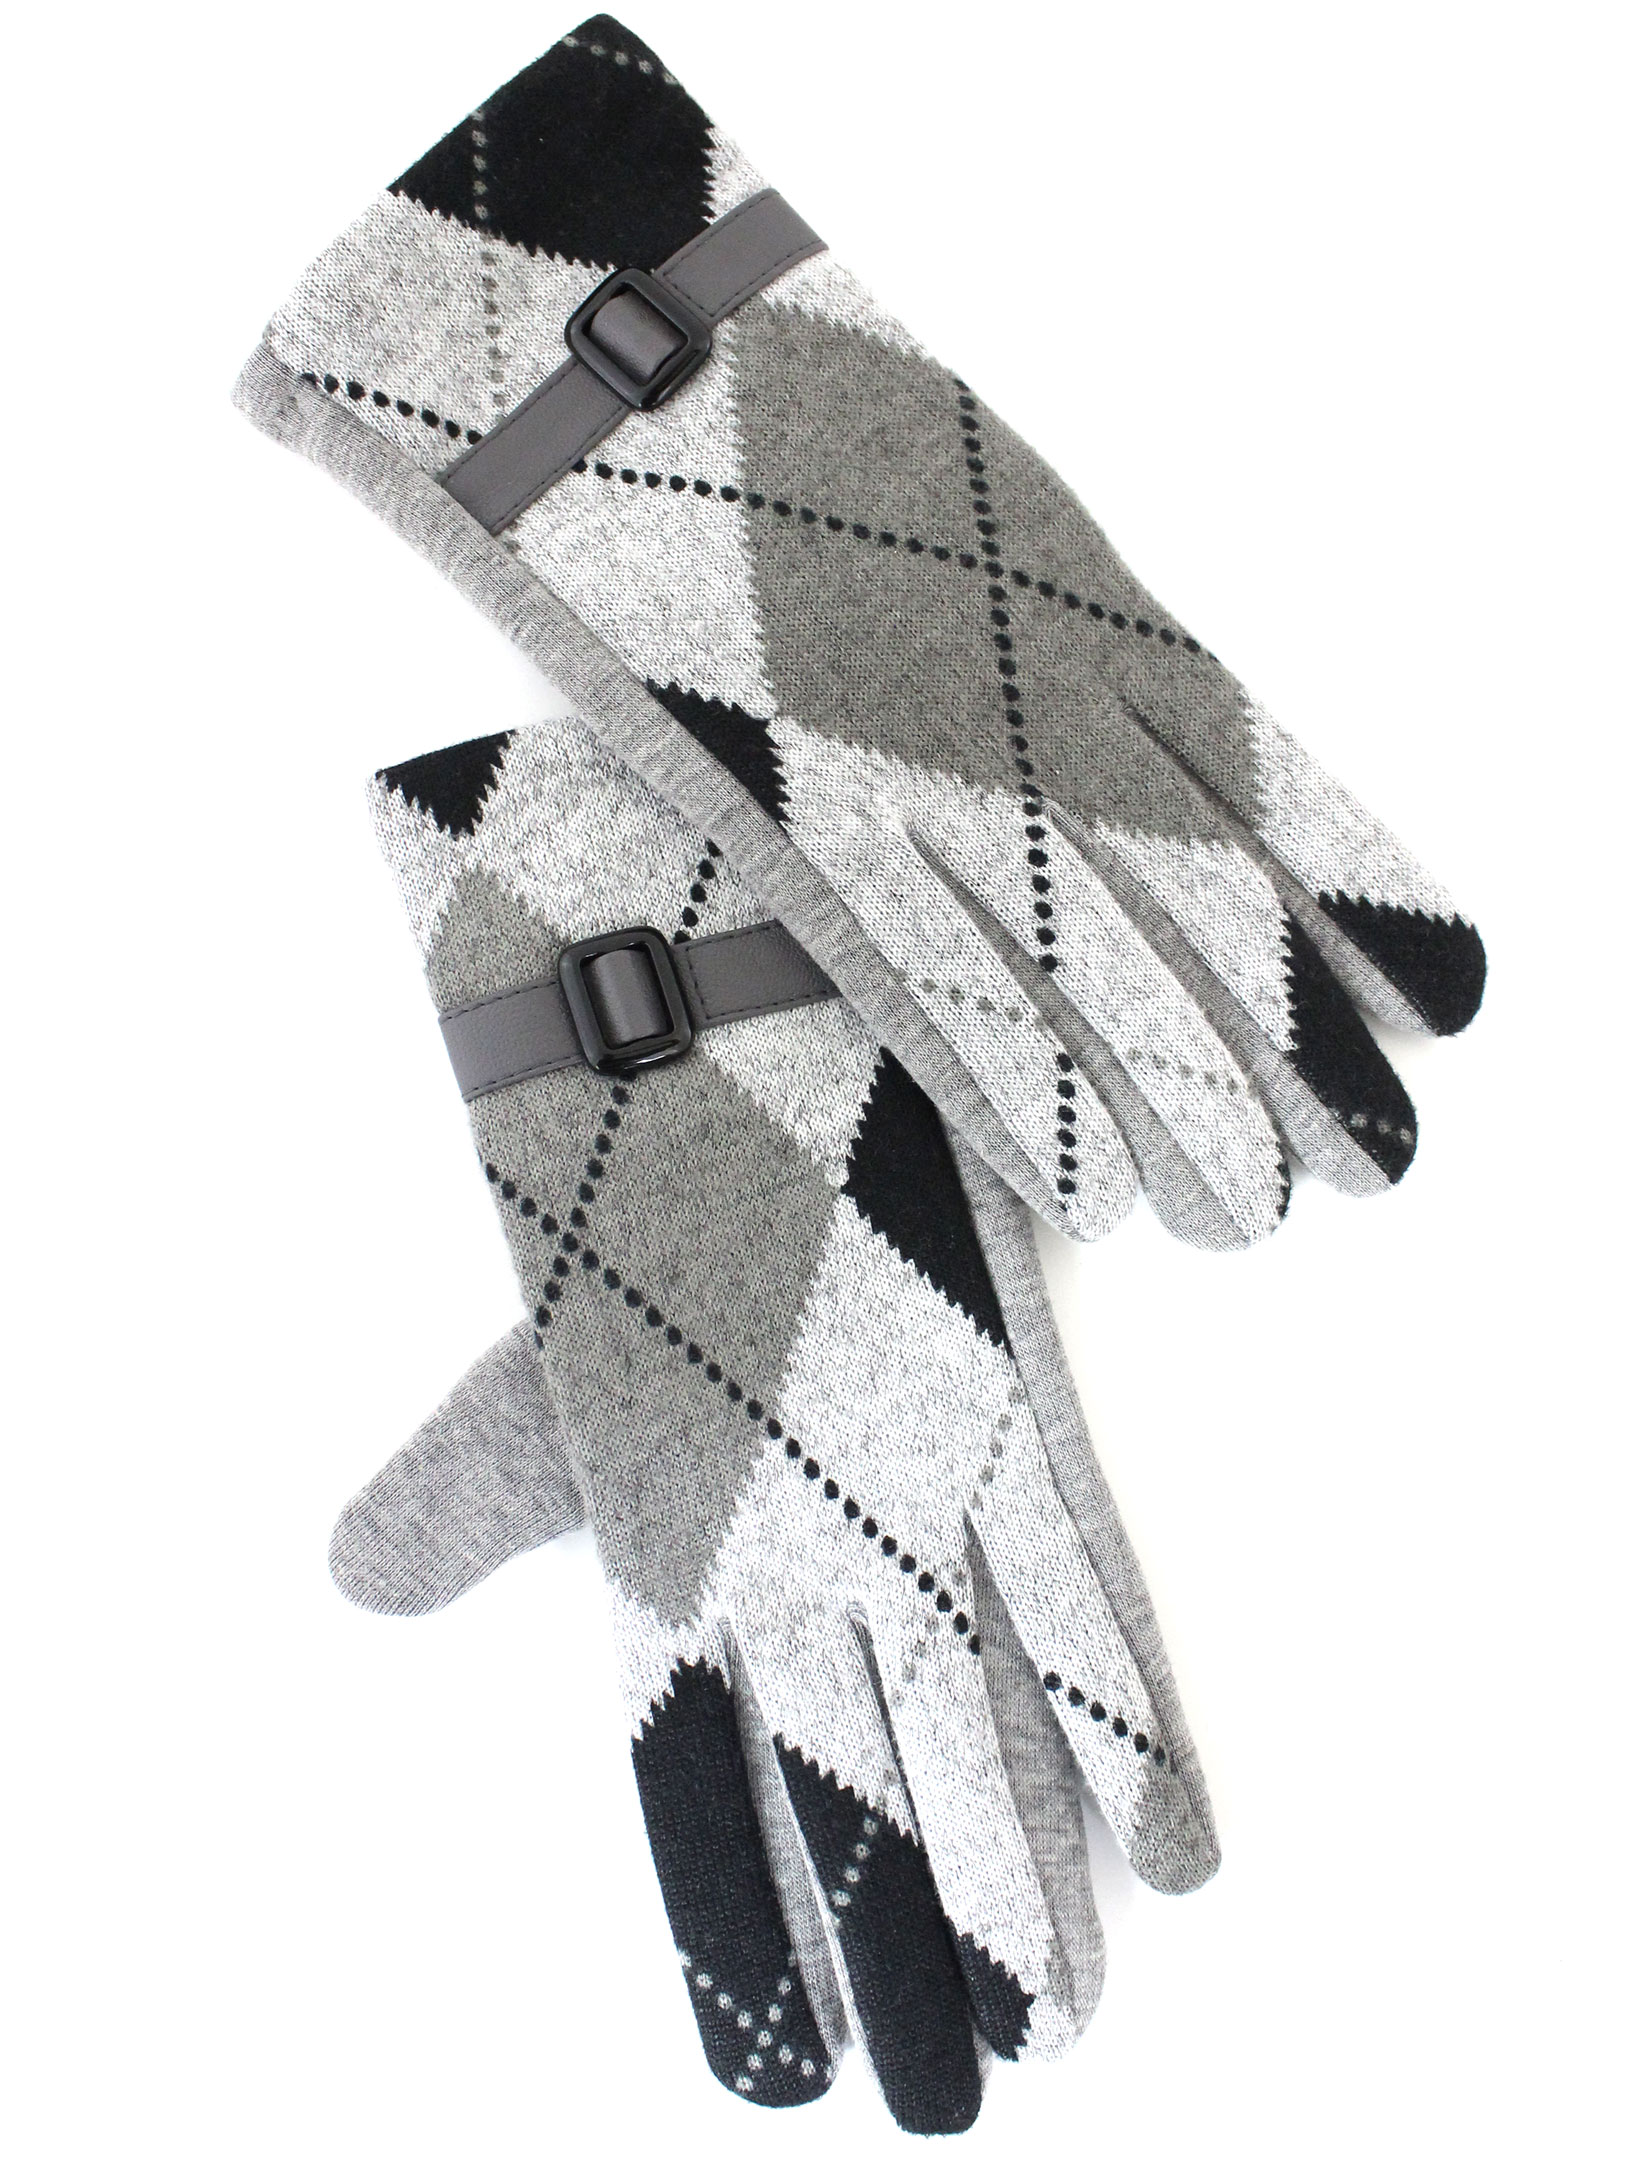 Magic Touch Quilting Gloves | Fat Quarter Shop Exclusive #MAGIC-TOUCH